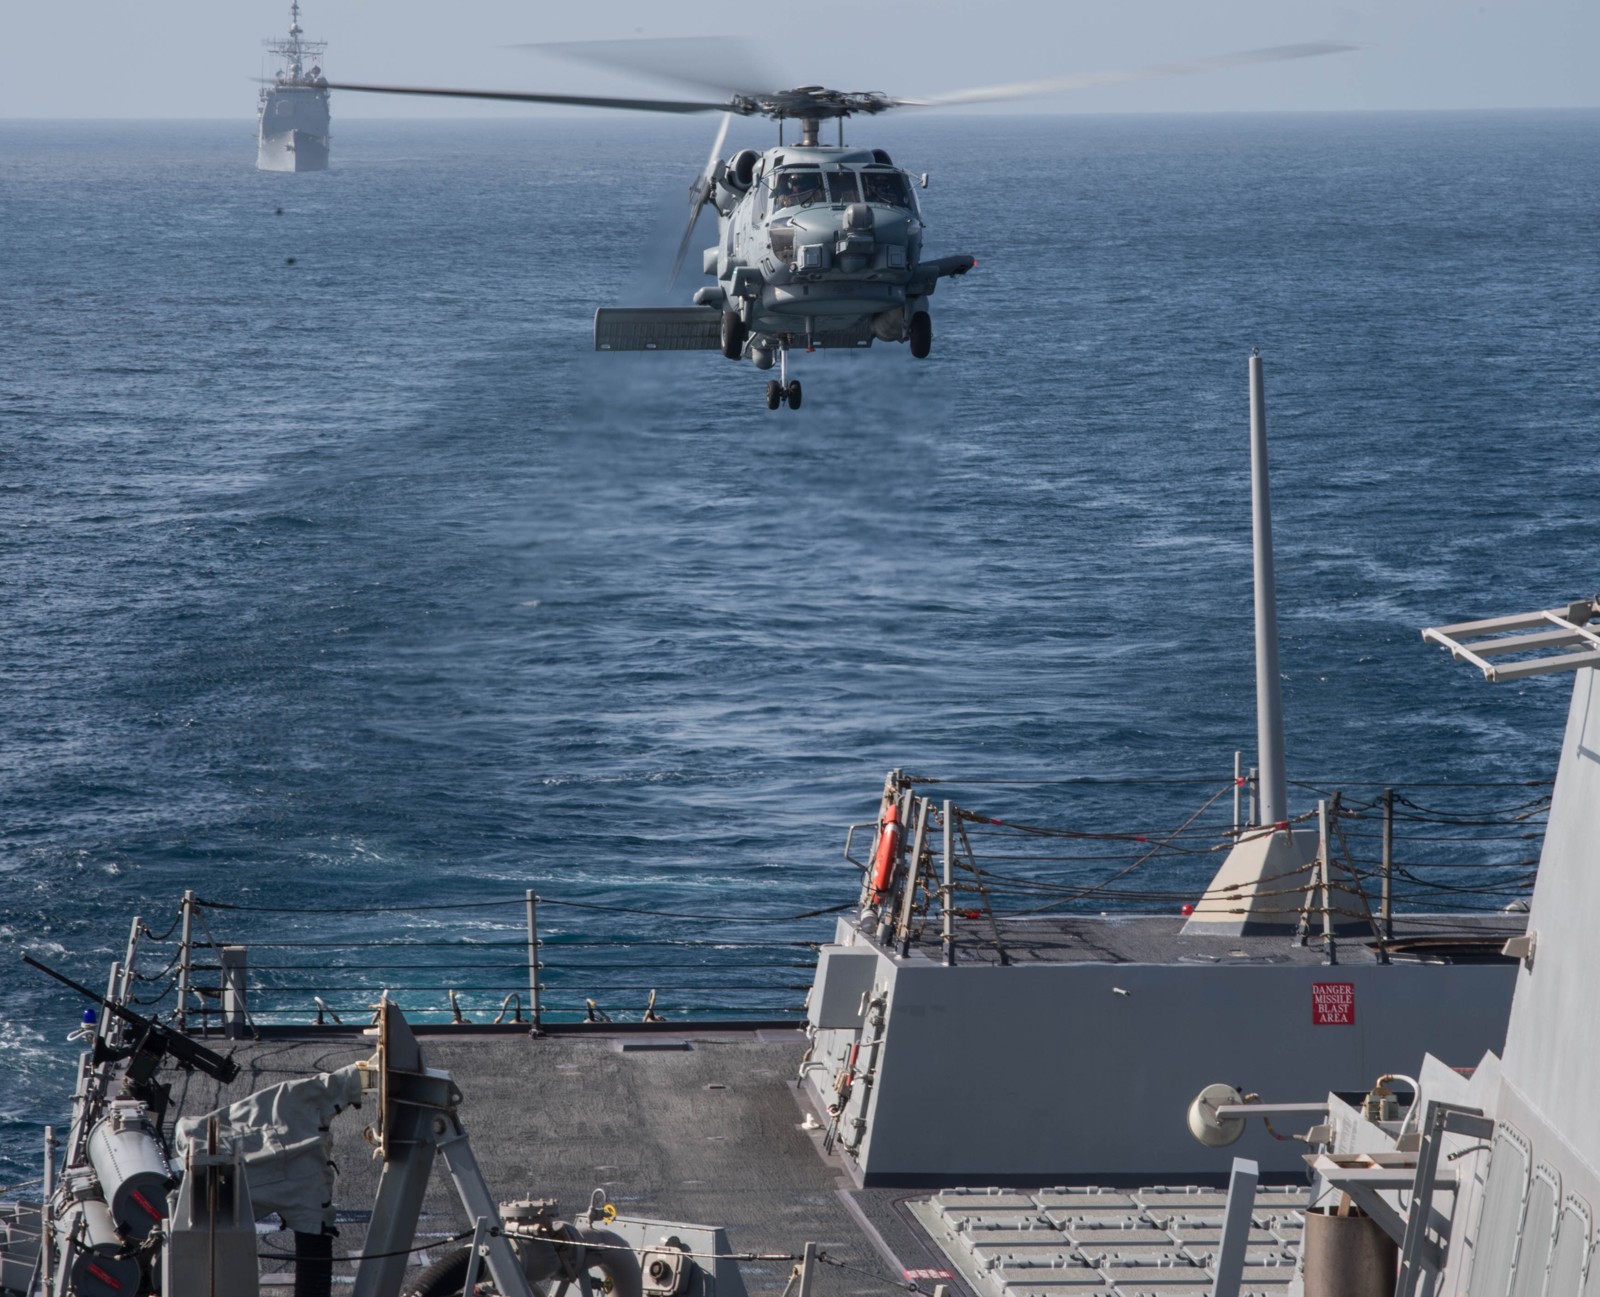 ddg-106 uss stockdale arleigh burke class guided missile destroyer aegis us navy helicopter 106